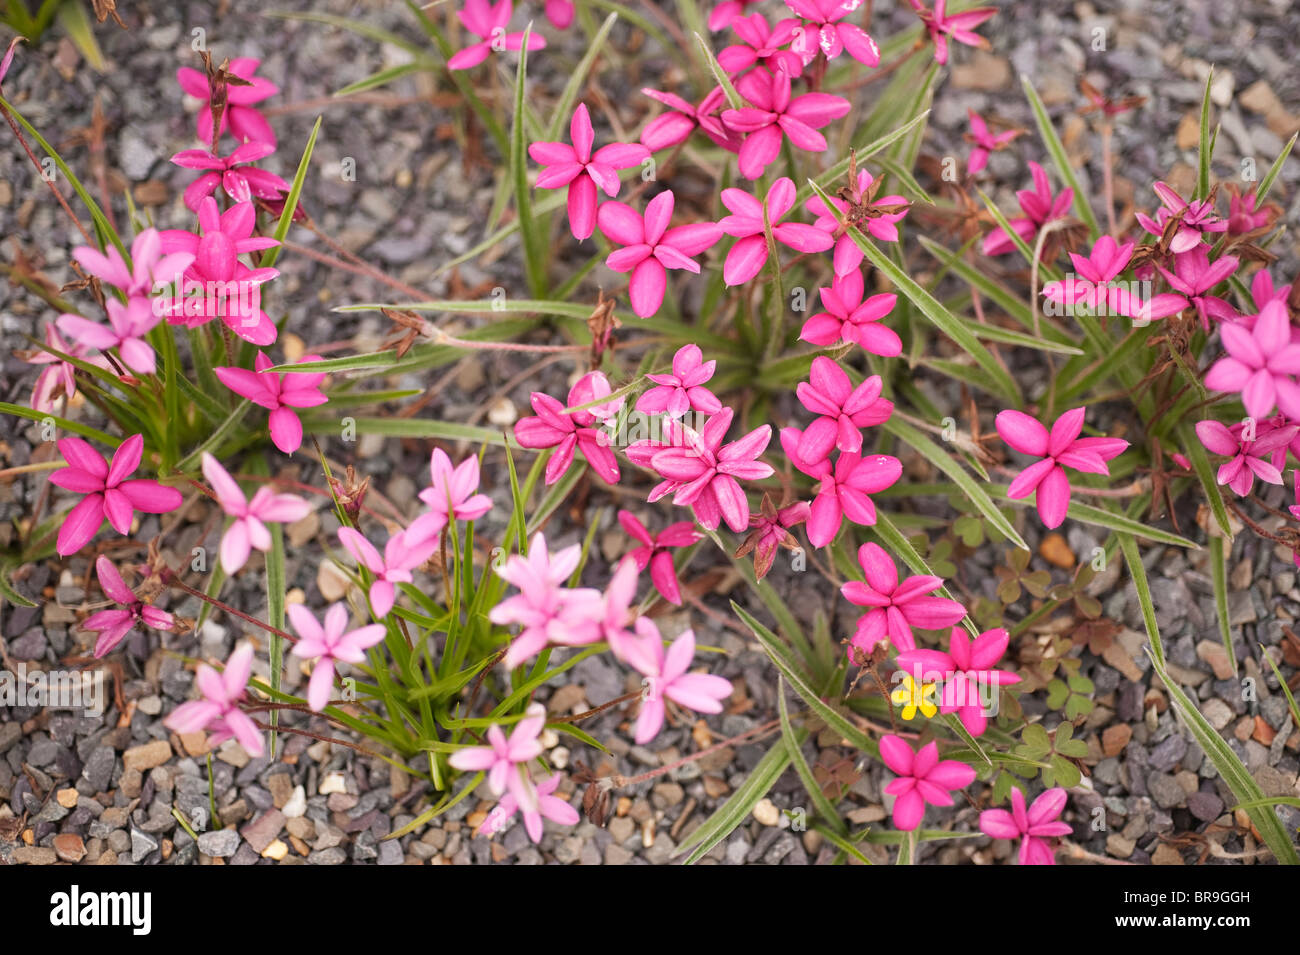 Rhodohypoxis growing though a gravel bed Stock Photo